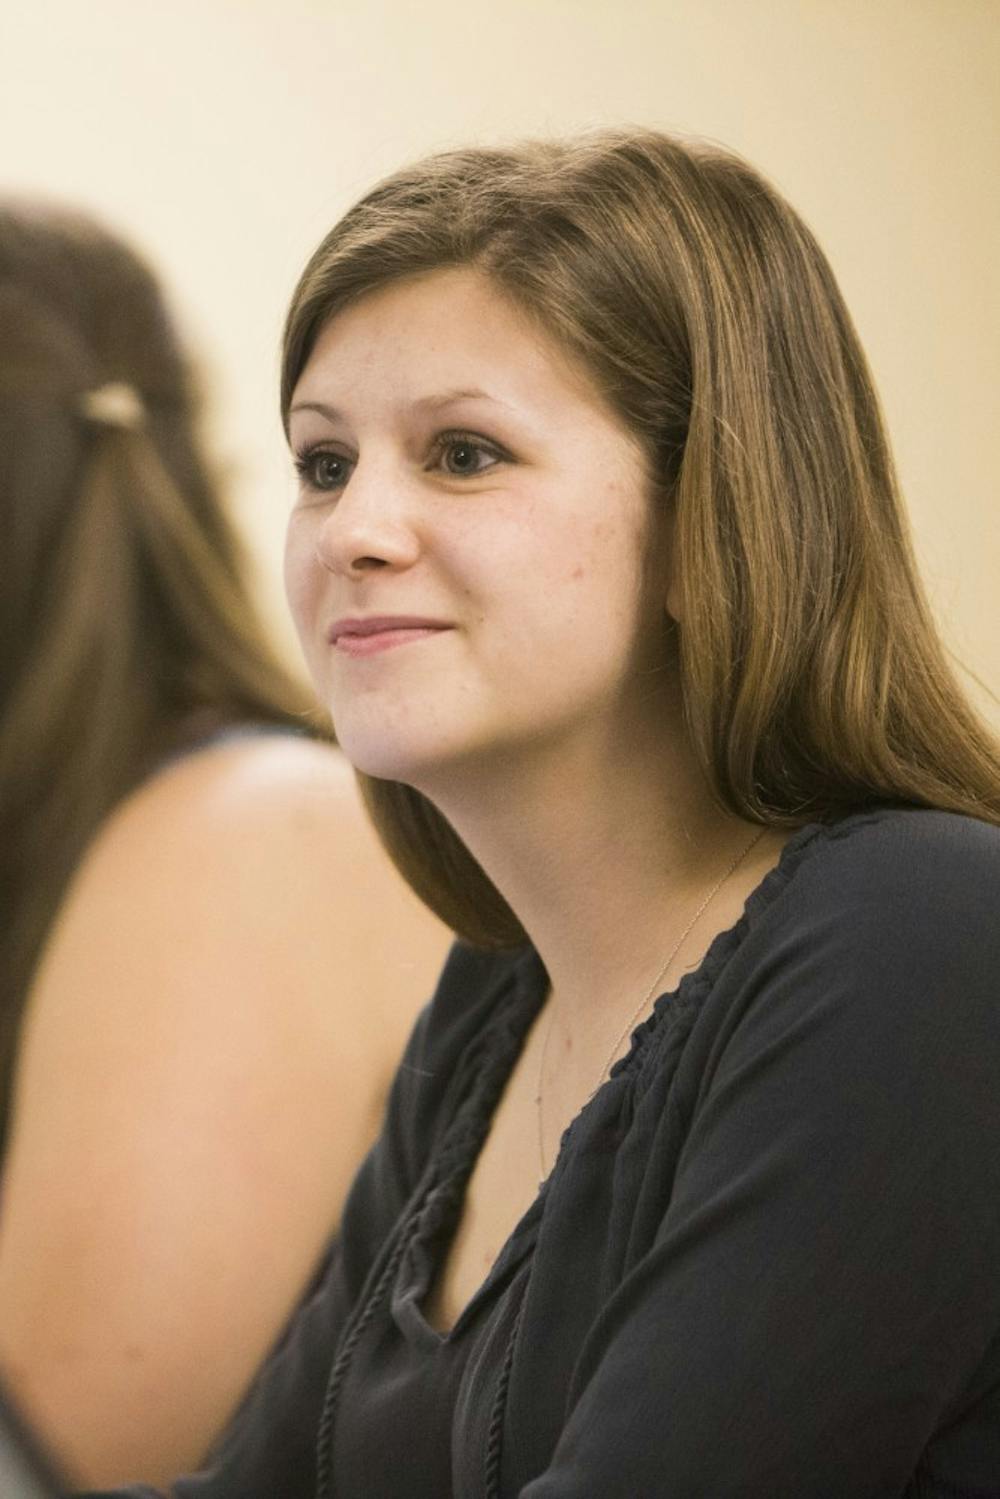 <p>The meeting was the first since Student Council elections, in which third-year Batten student Sarah Kenny was elected Student Council president.</p>